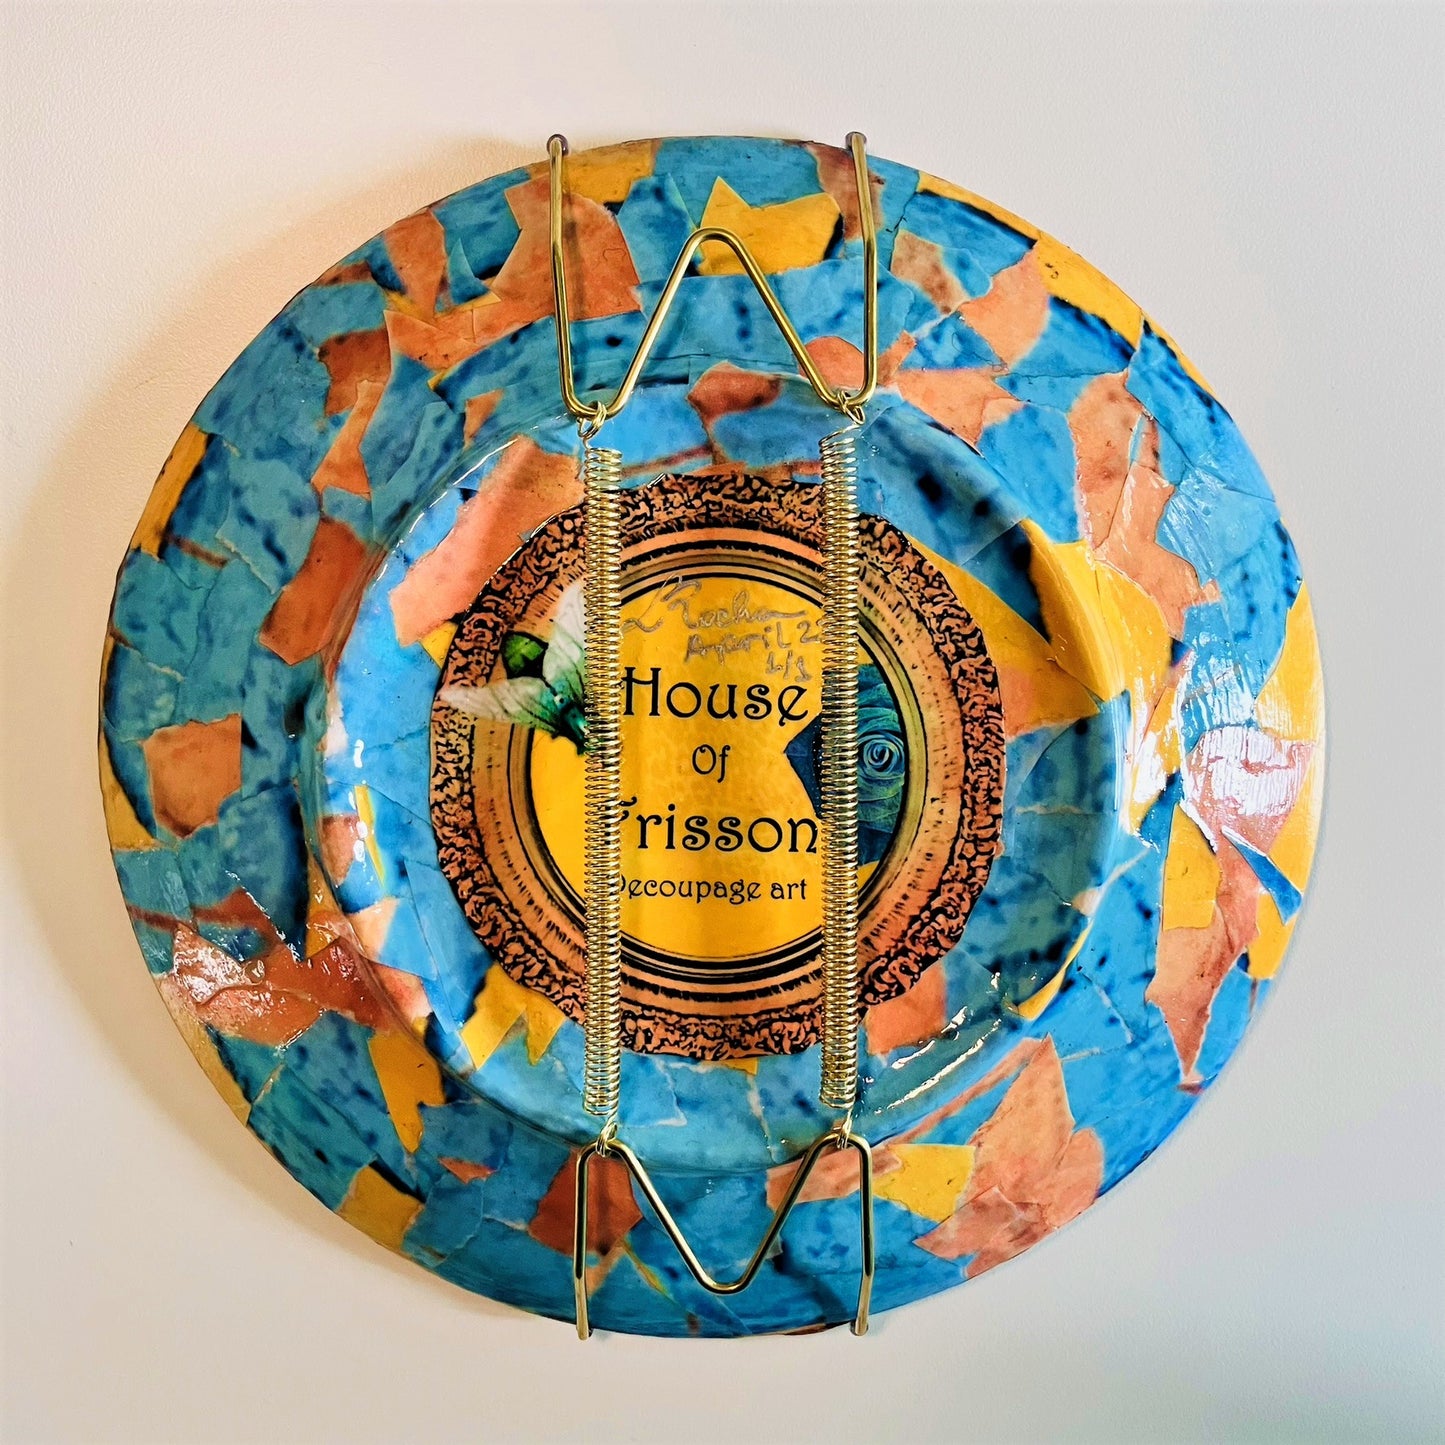 "Blimey" Wall Plate by House of Frisson, featuring a collage of word "blimey" framed with a vintage looking frame, with colourful background. Showing collage on back of the plate, and an attached wall hanger.